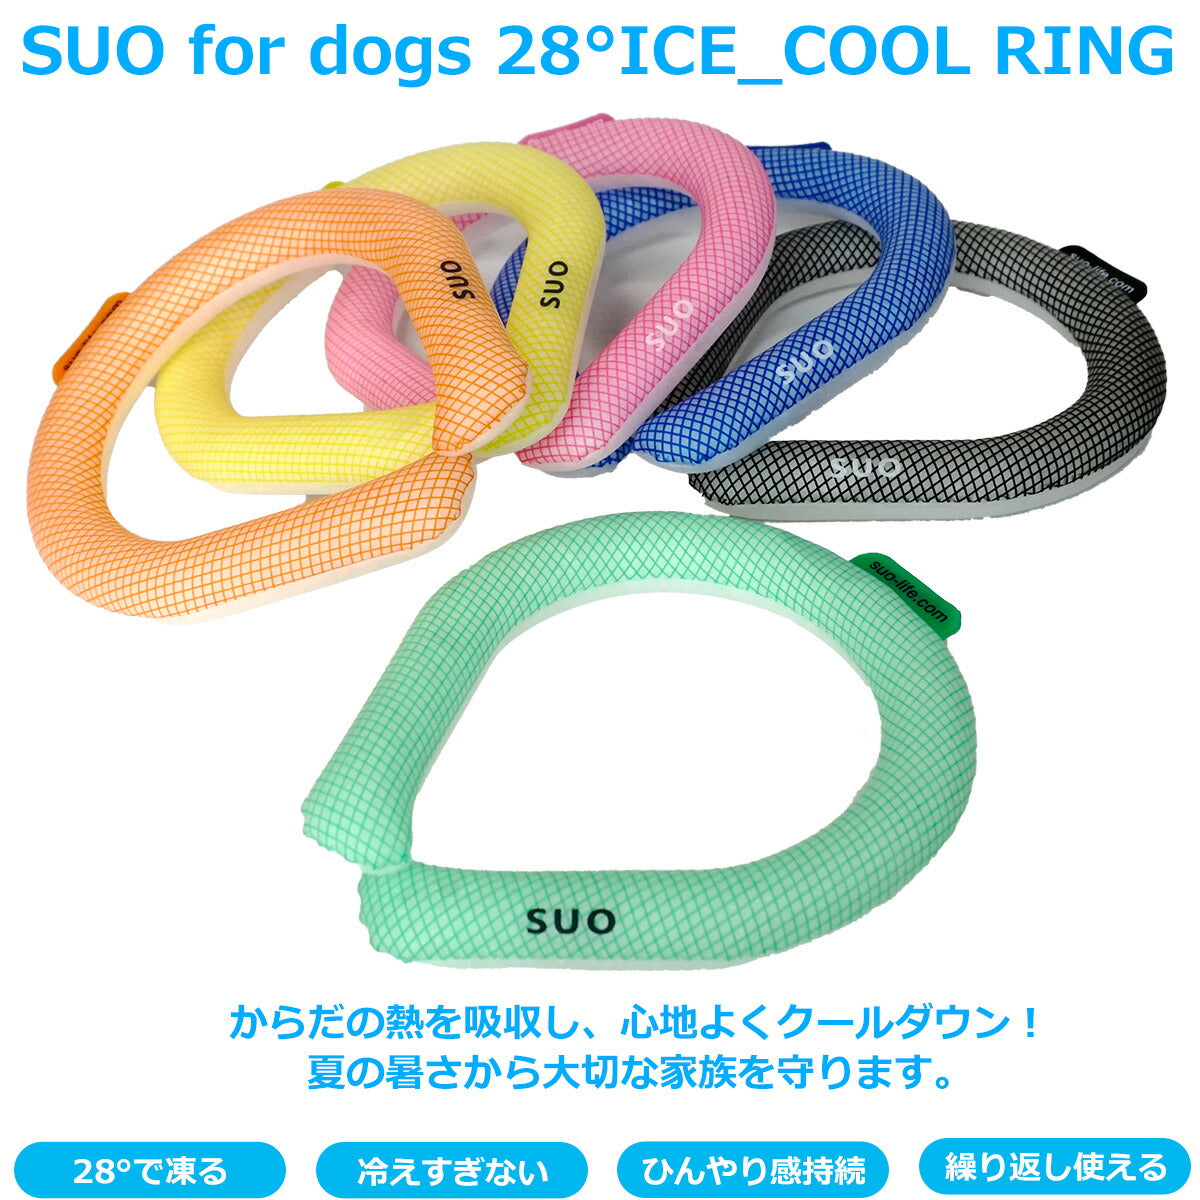 SUO for dogs 28°ICE SUOリング ボタンなし S イエロー 熱中症対策グッズ 暑さ対策 ひんやり 首 冷感 犬 大人 子供